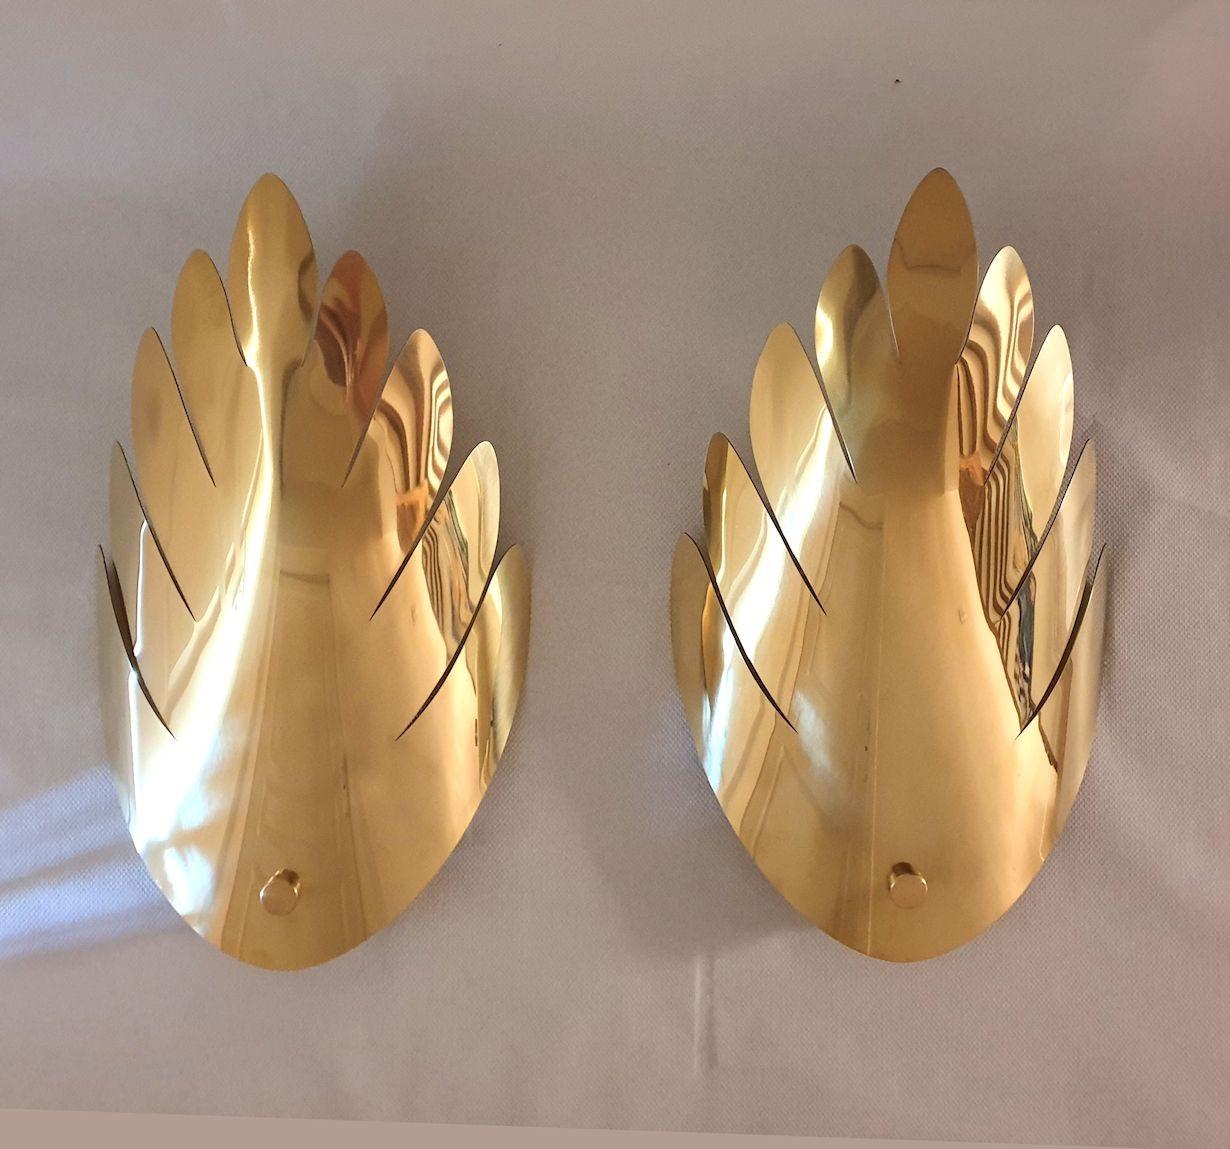 Pair of large Mid-Century Modern brass wall sconces, in the style of Maison Jansen, France 1970s
The leaf brass sconces have 1 light each, and are professionally rewired for the US. (complimentary European standards rewiring upon request)
Nice